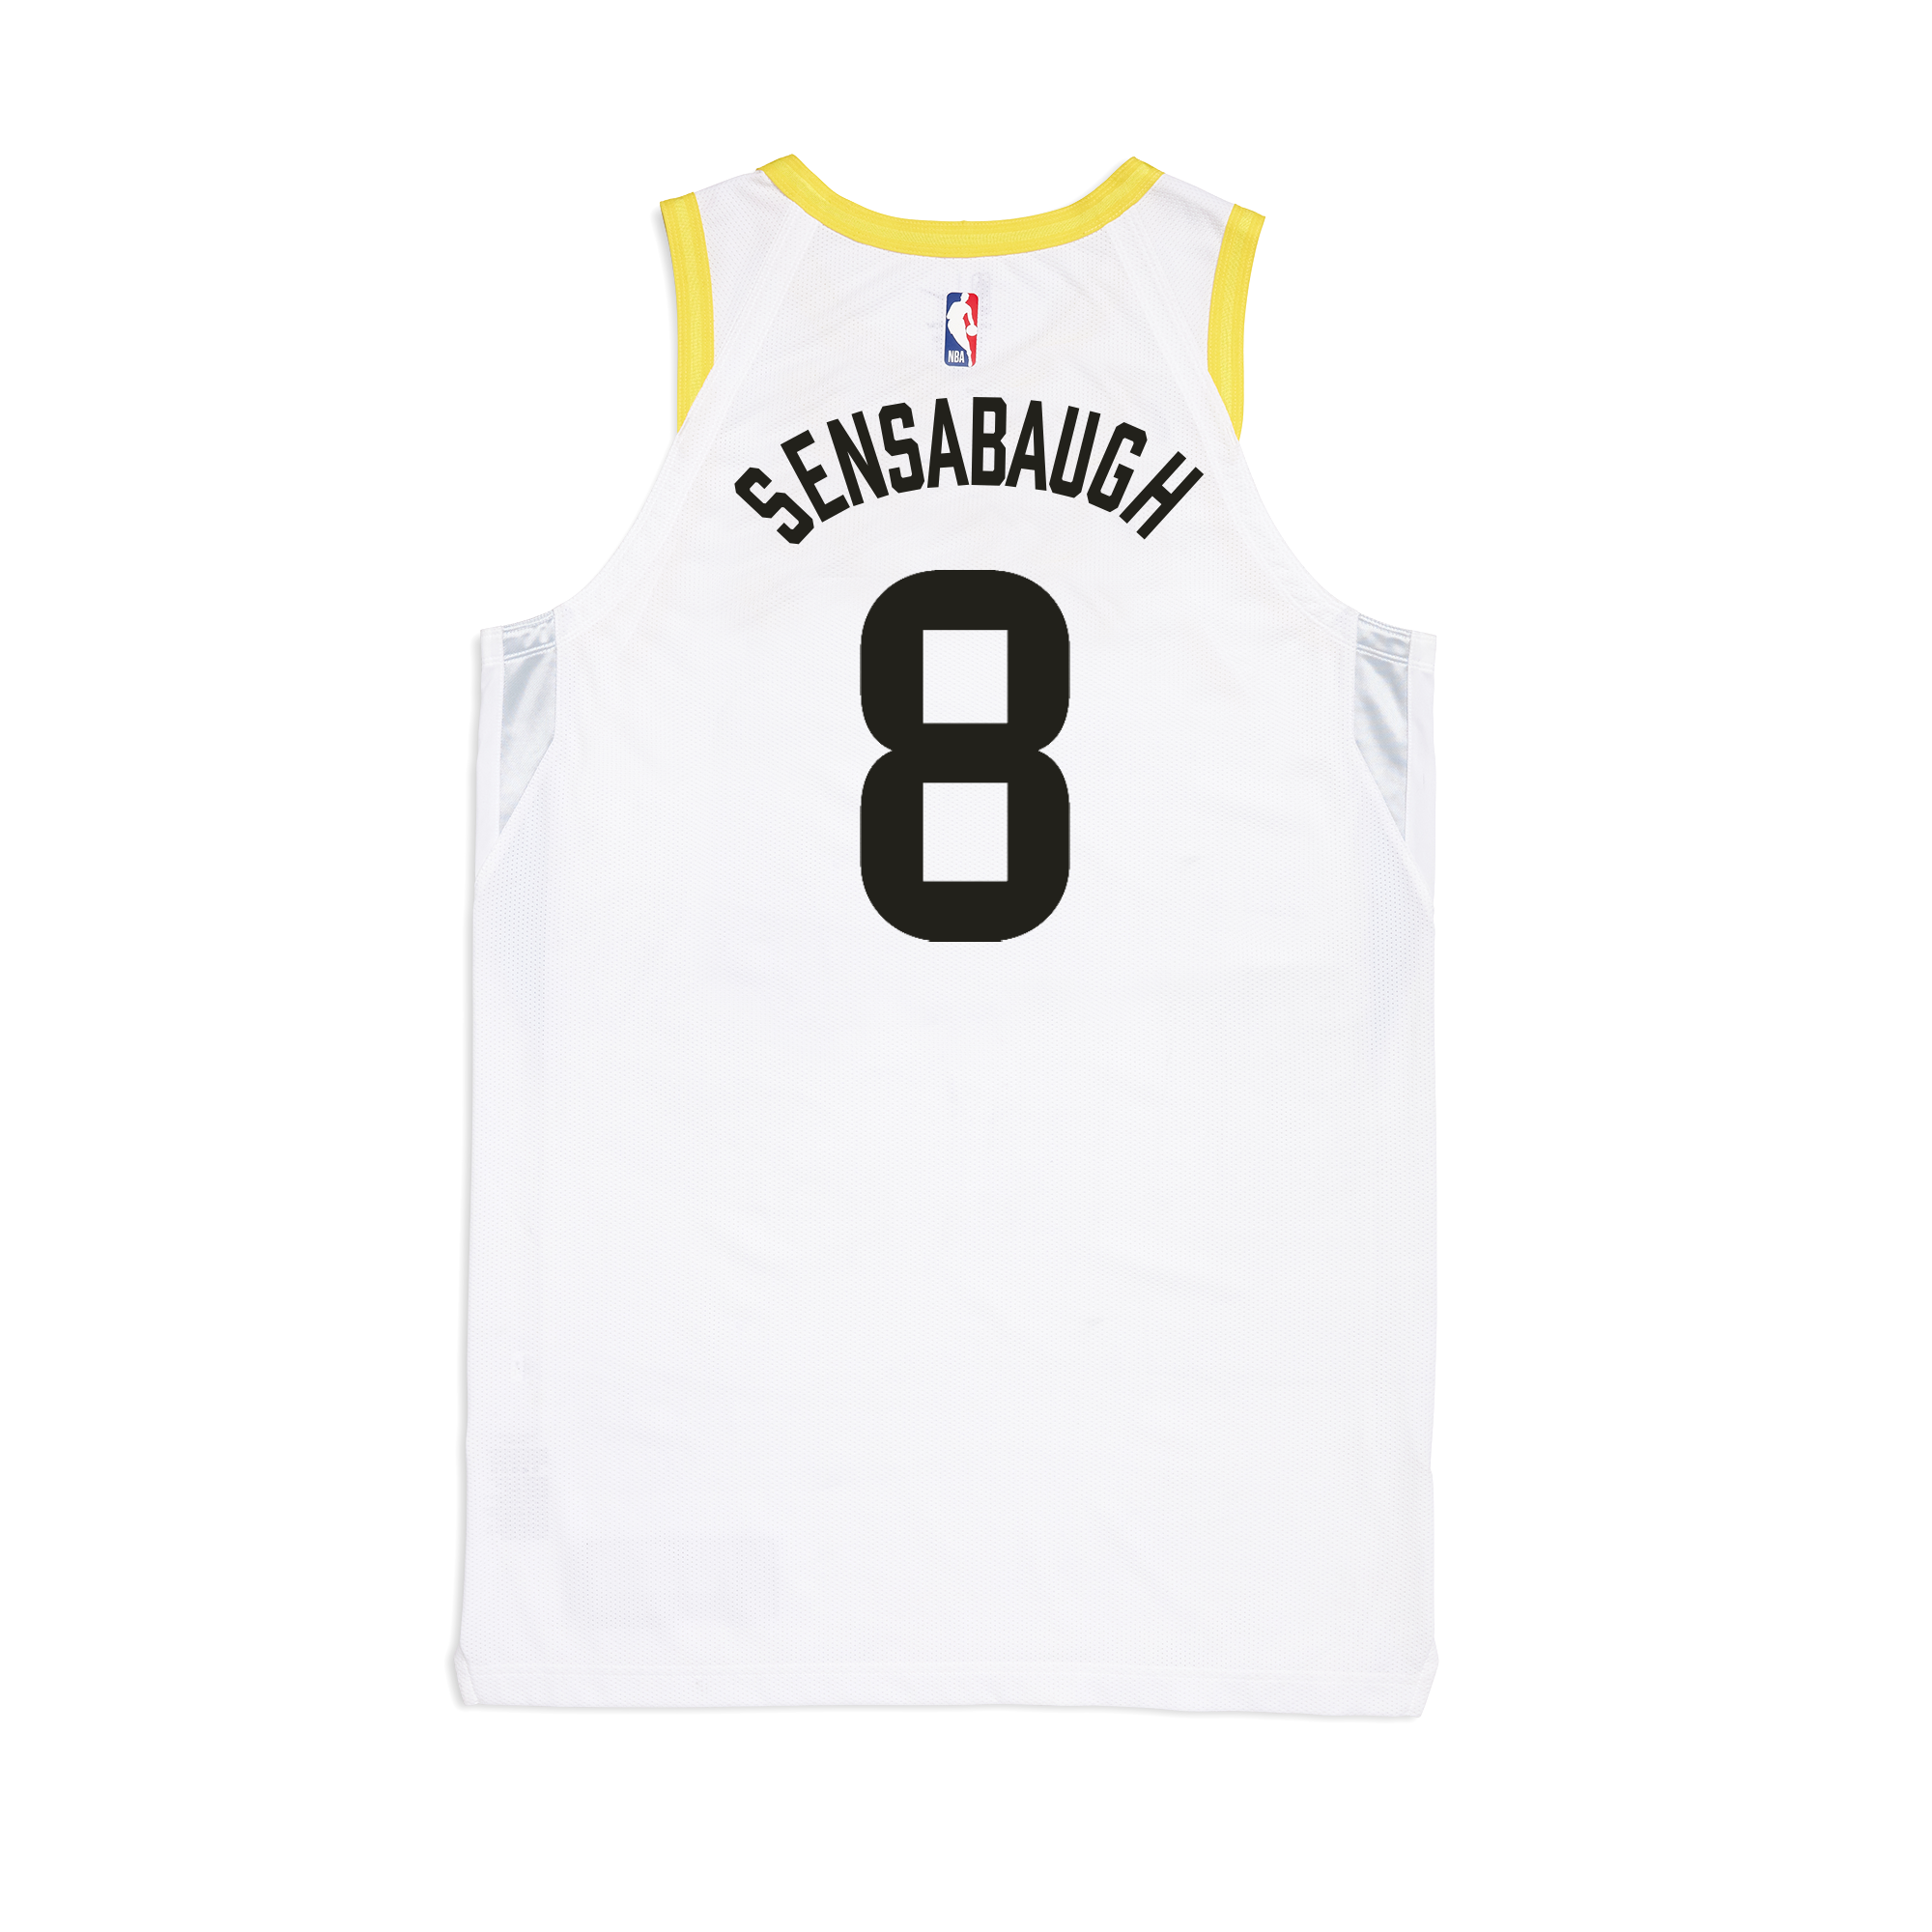 NBA All-Star starters are set, snag the latest t-shirts and hoodies